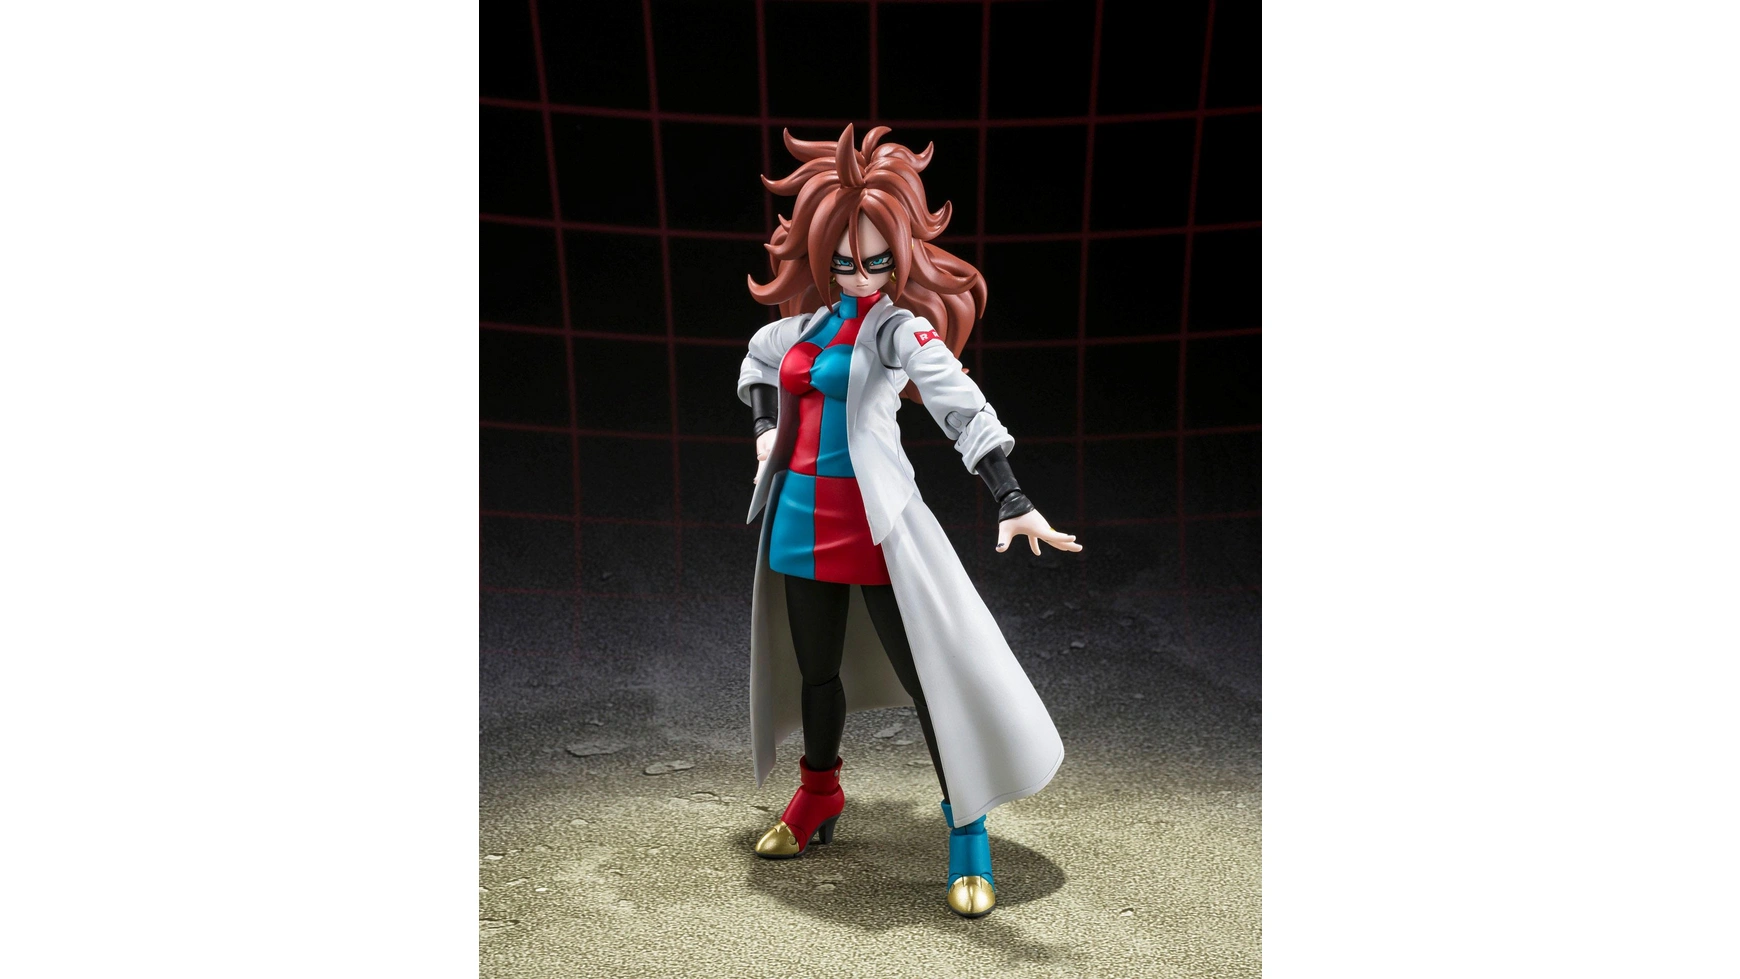 Dragon Ball FighterZ СХ Фигурка Figuarts Android 21 (лабораторный халат), 15 см, аниме-фигурка фигурка tamashii nations the falcon